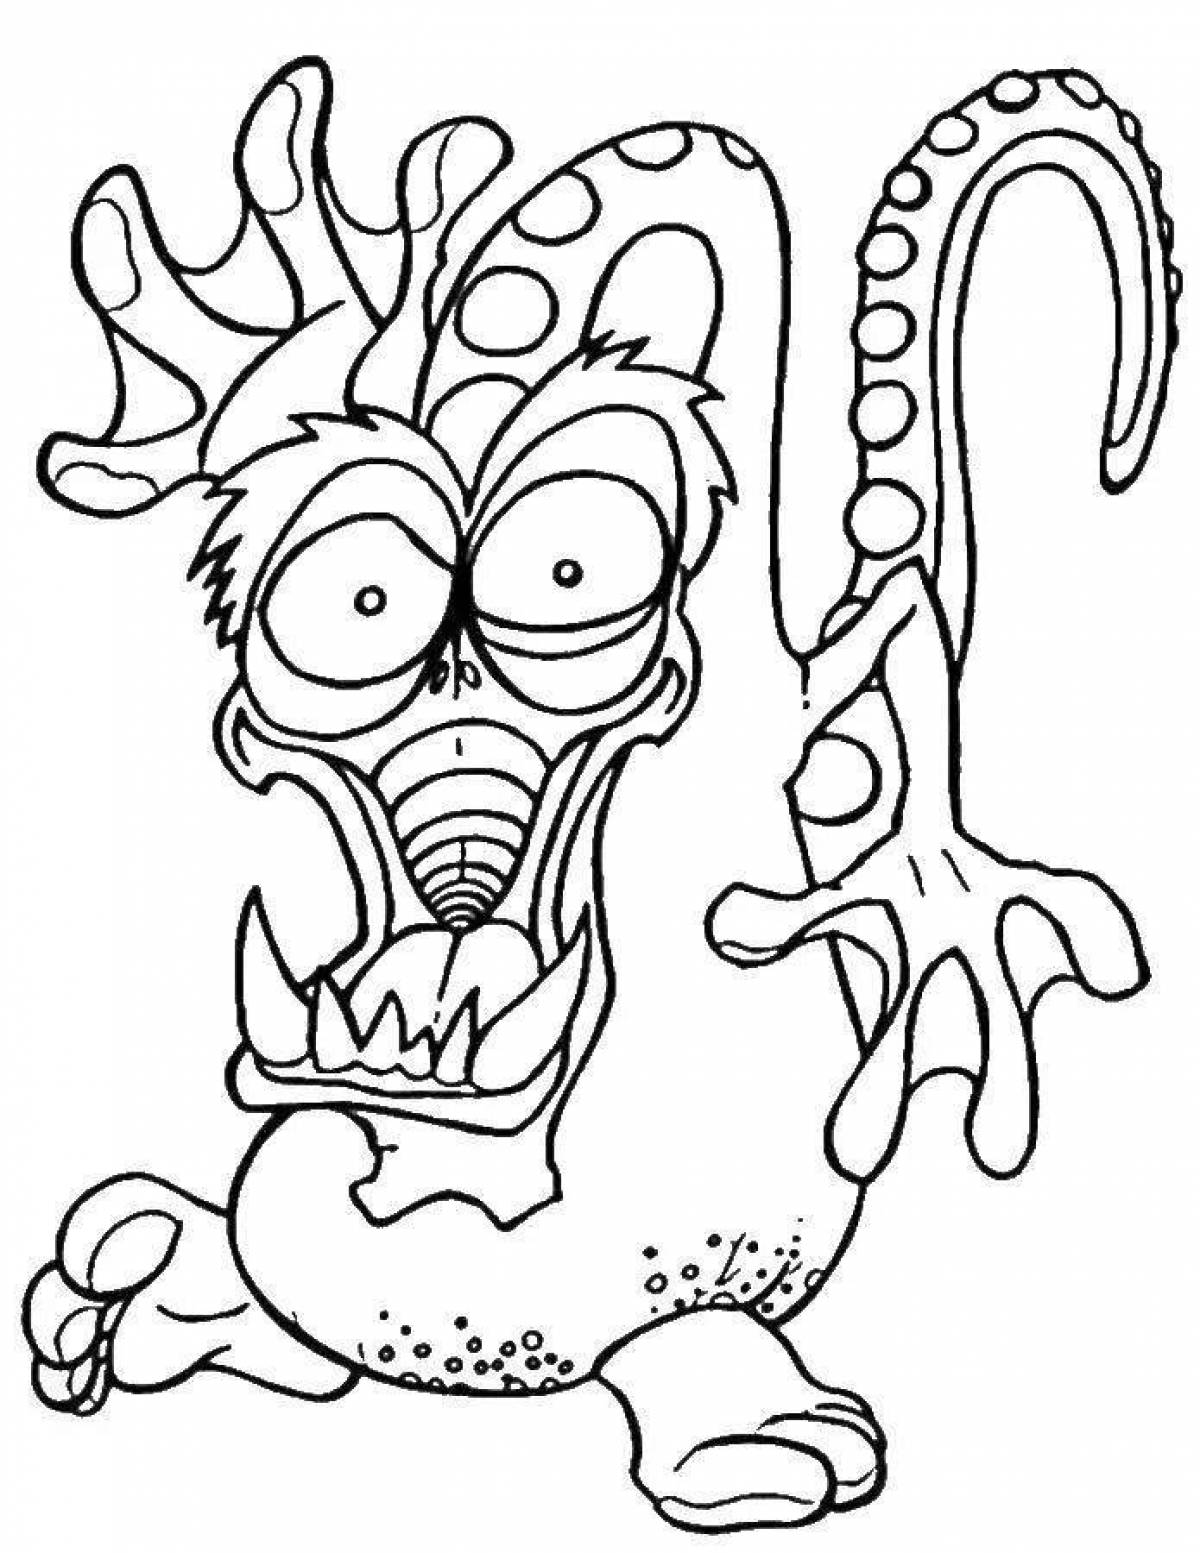 Coloring page scary siren-headed monster